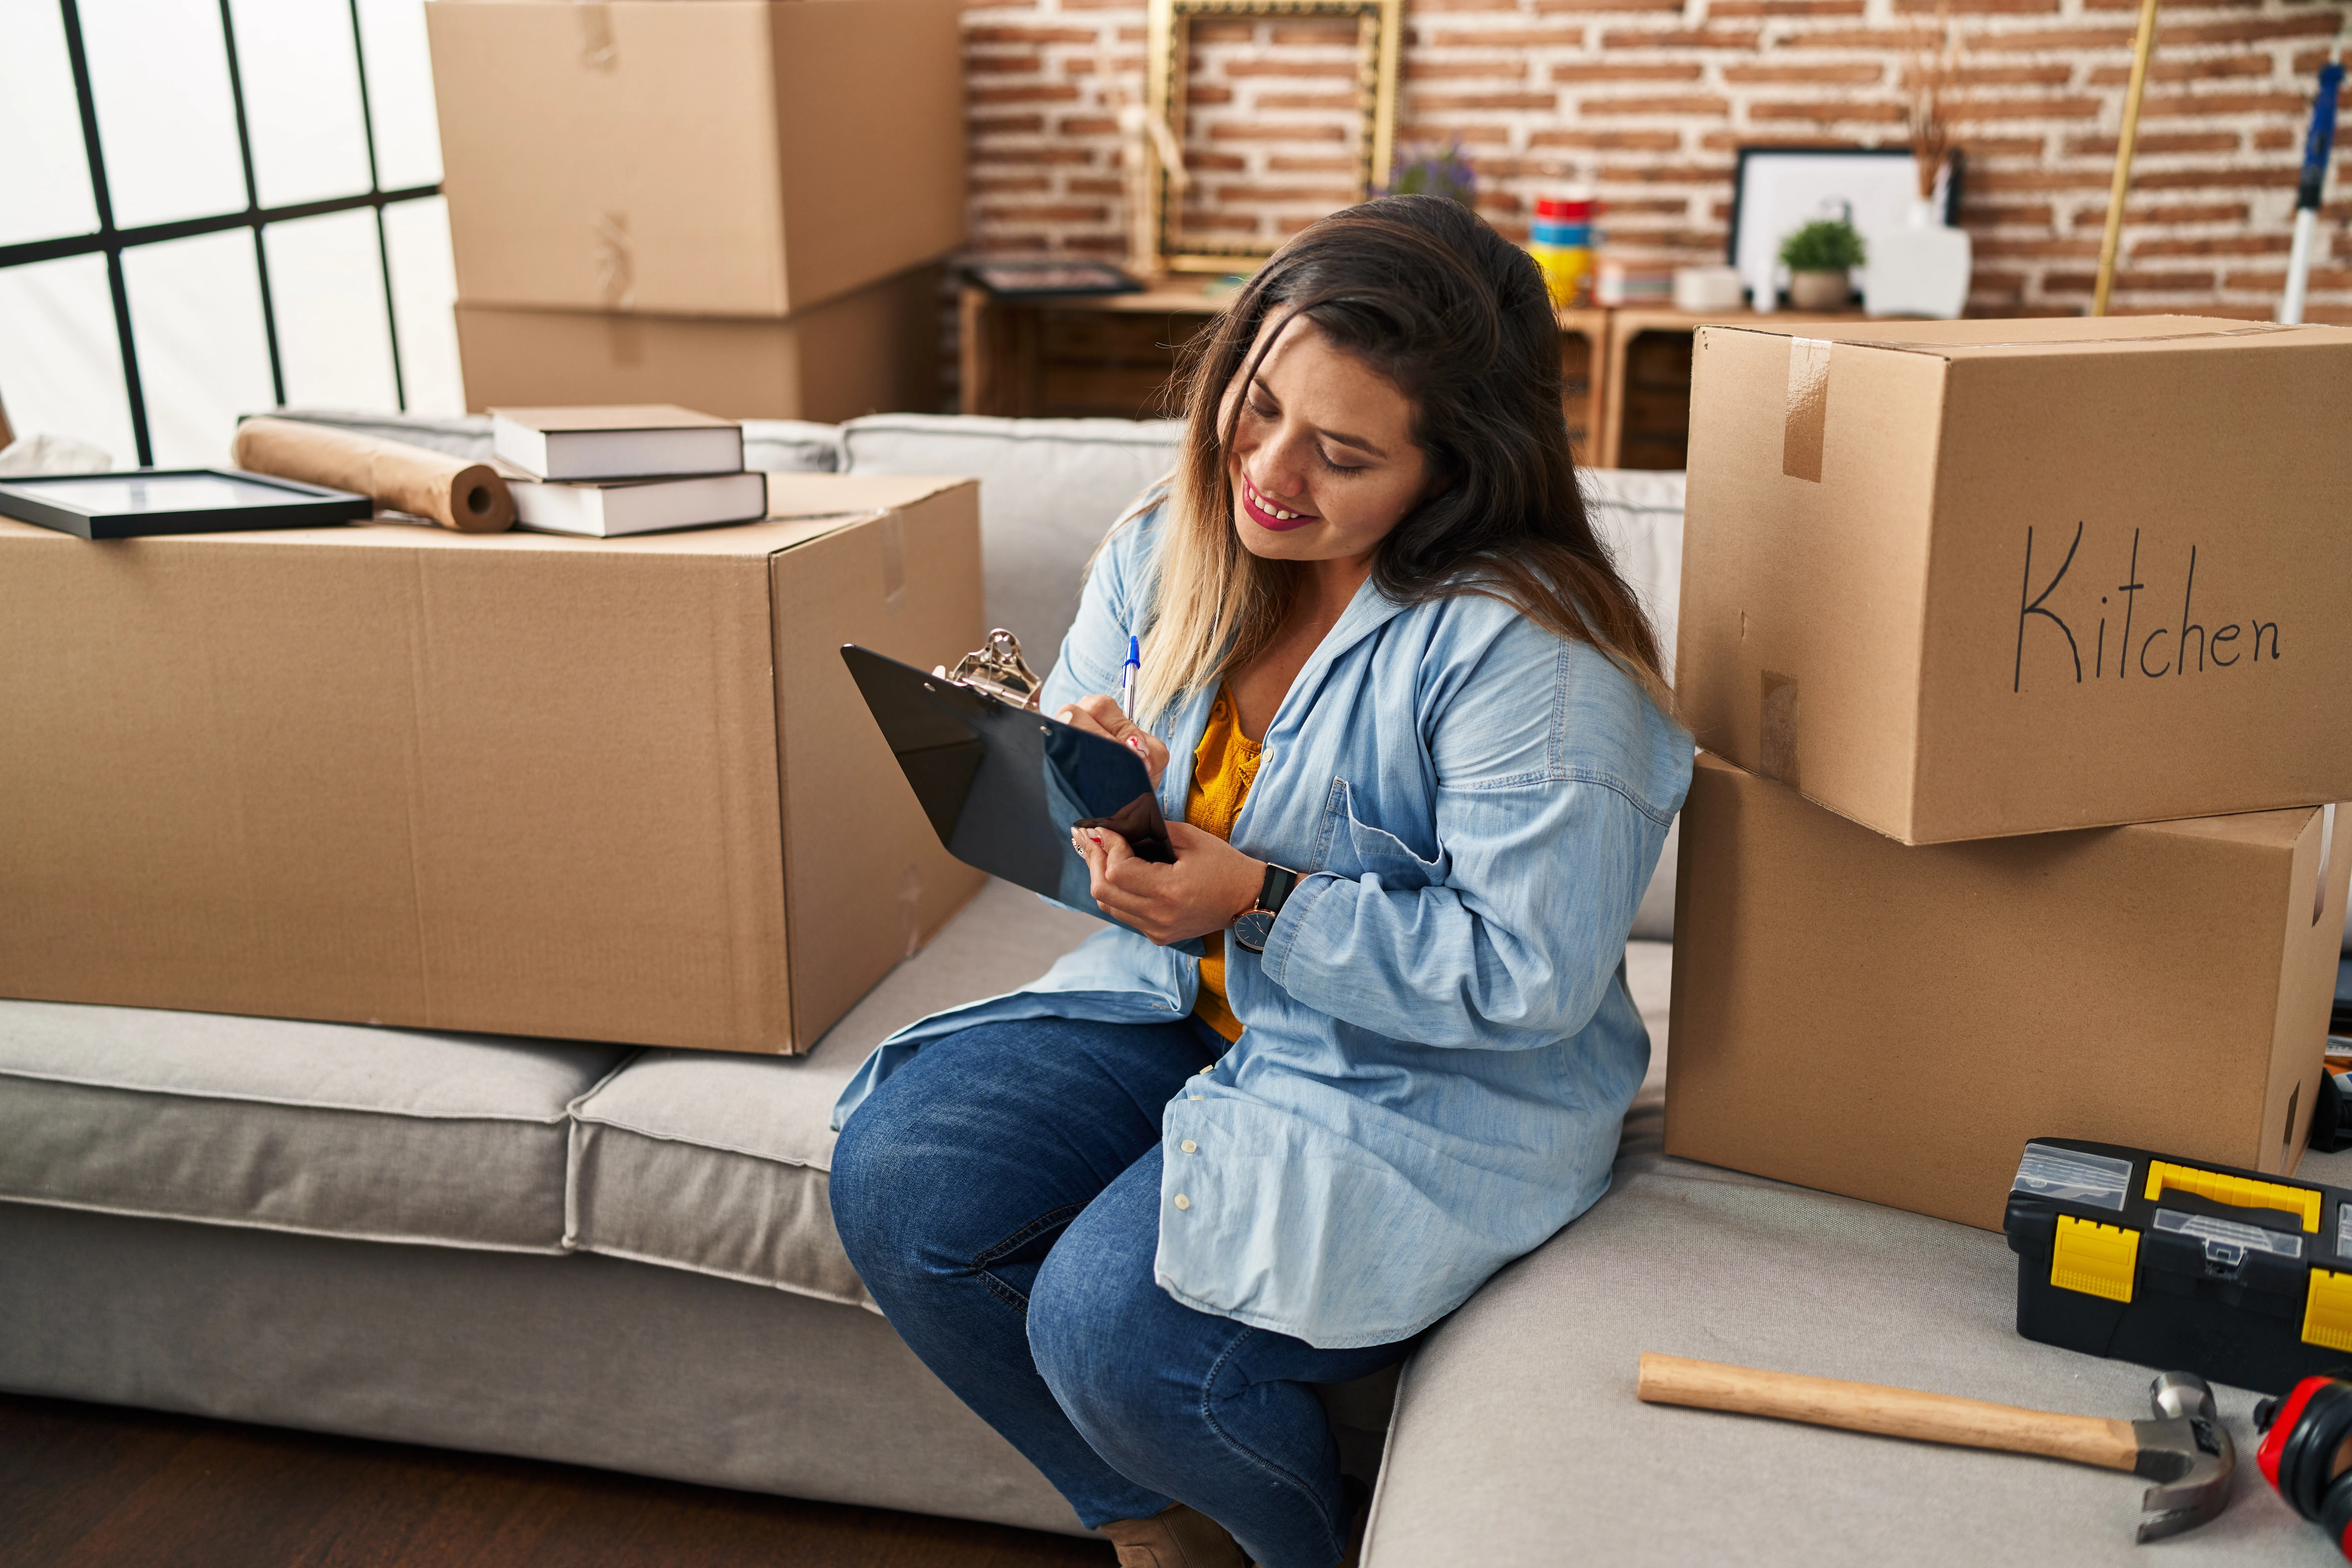 New Home purchase Moving Checklist 